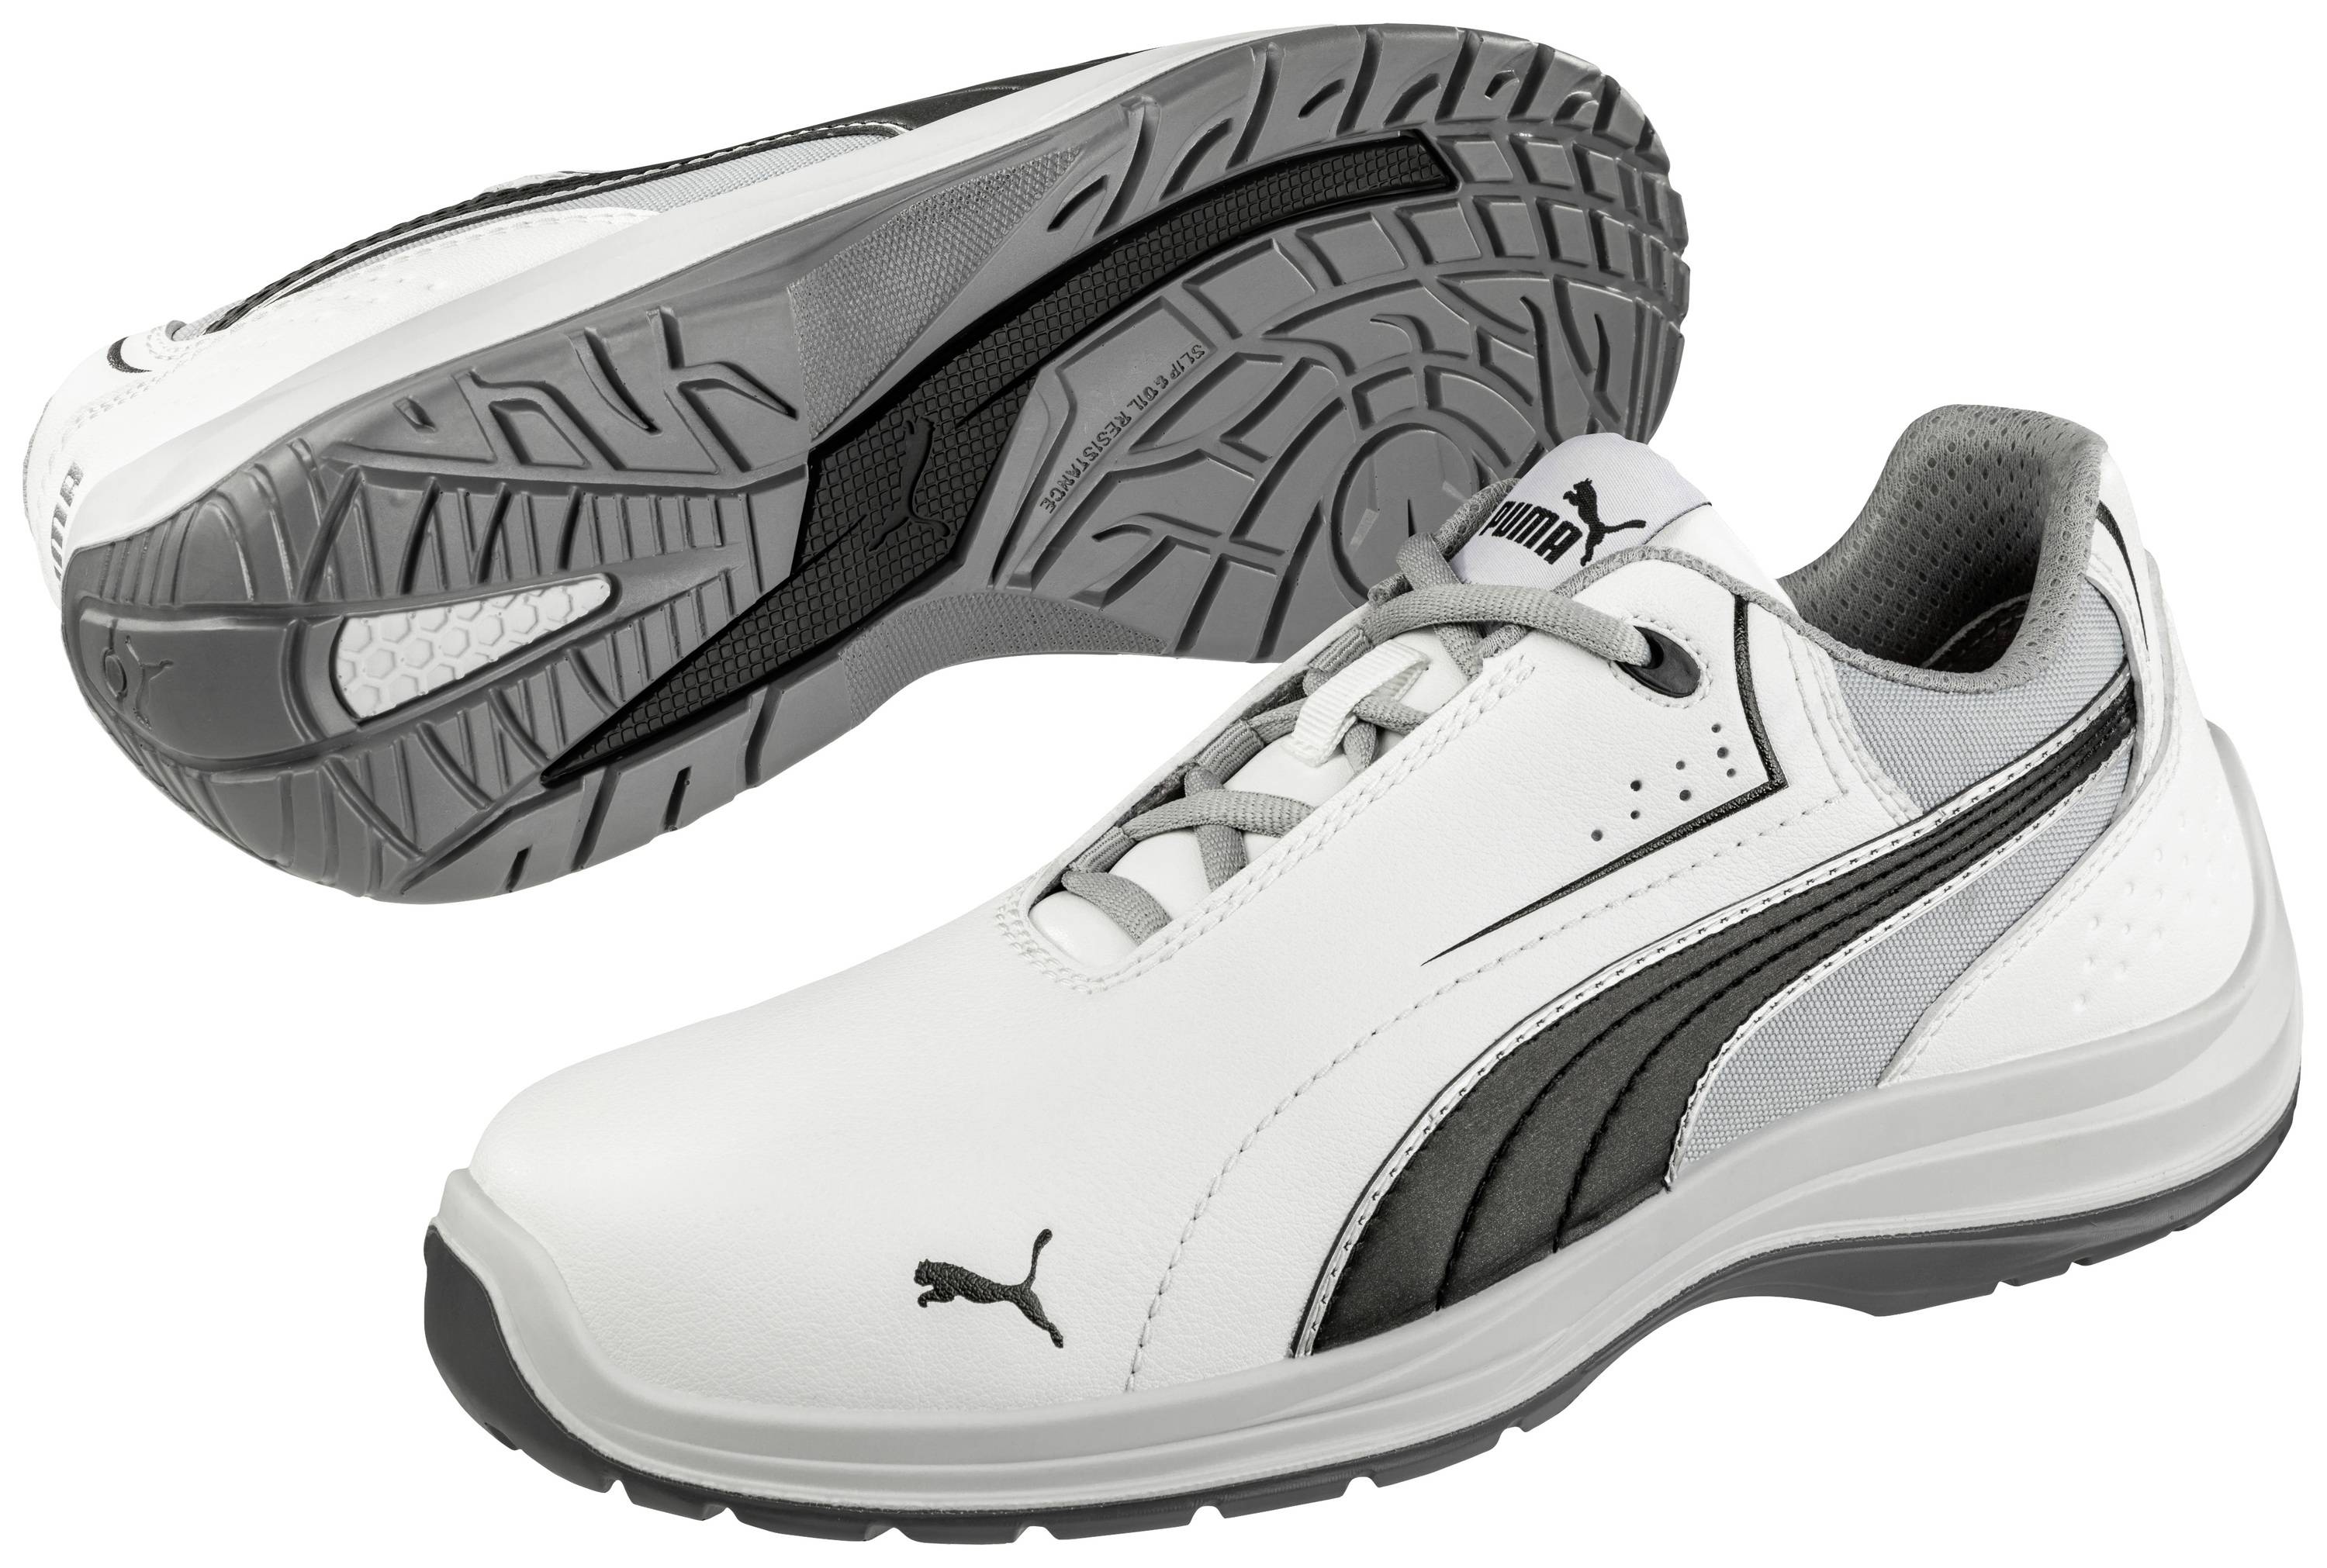 PUMA Safety WHITE LOW S3 S43 643450100000043 Protective footwear S3 si | Conrad.com